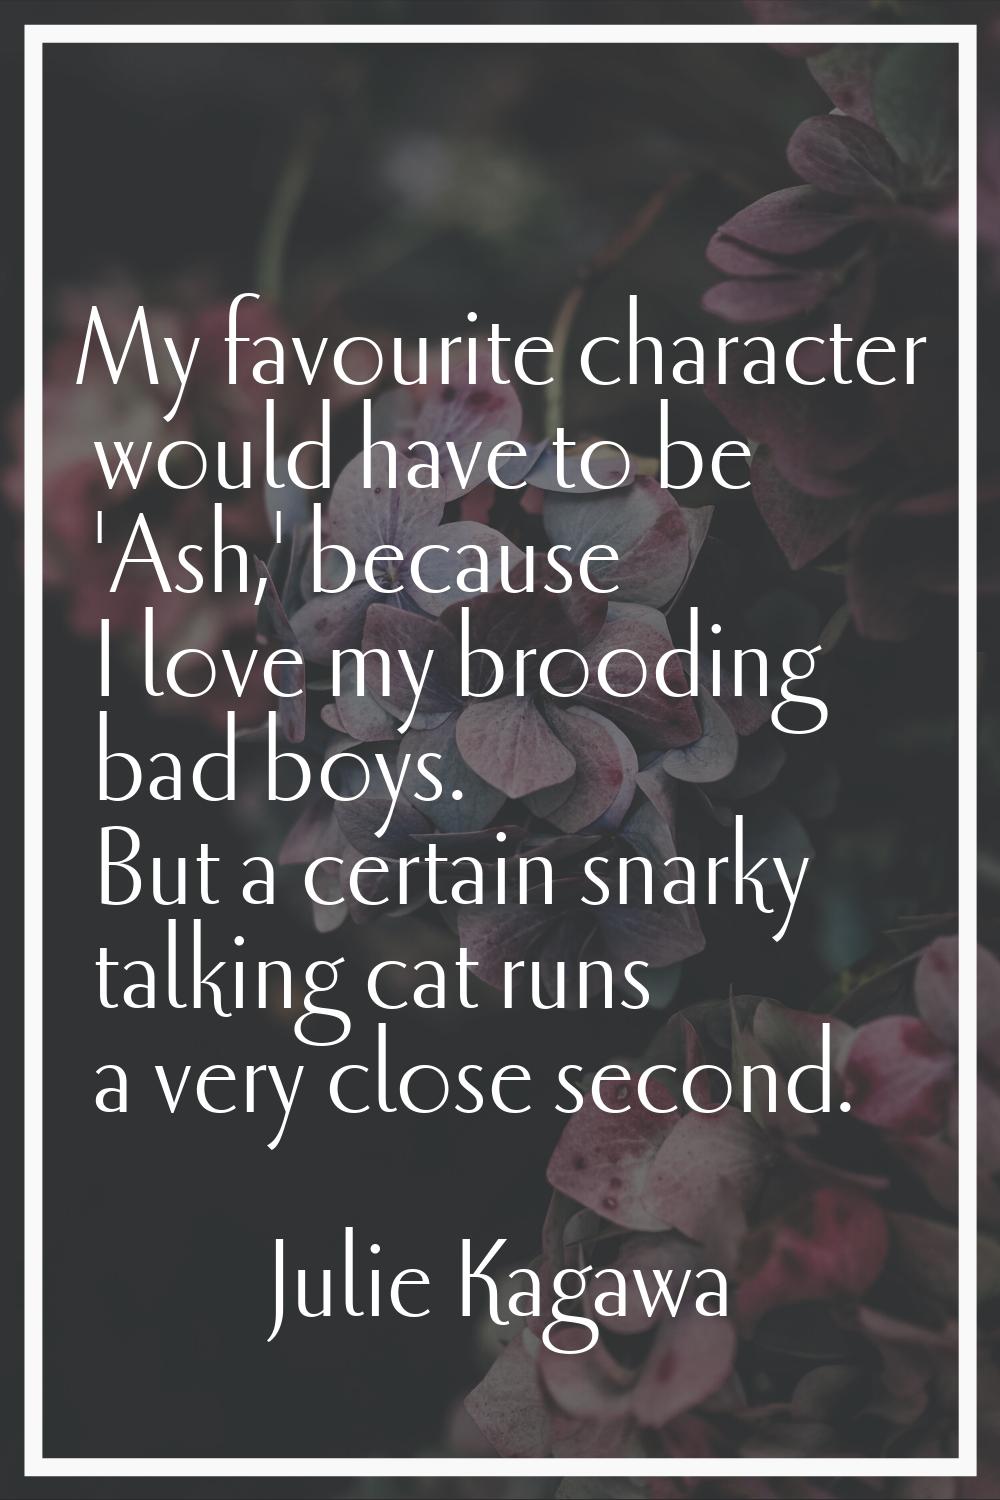 My favourite character would have to be 'Ash,' because I love my brooding bad boys. But a certain s